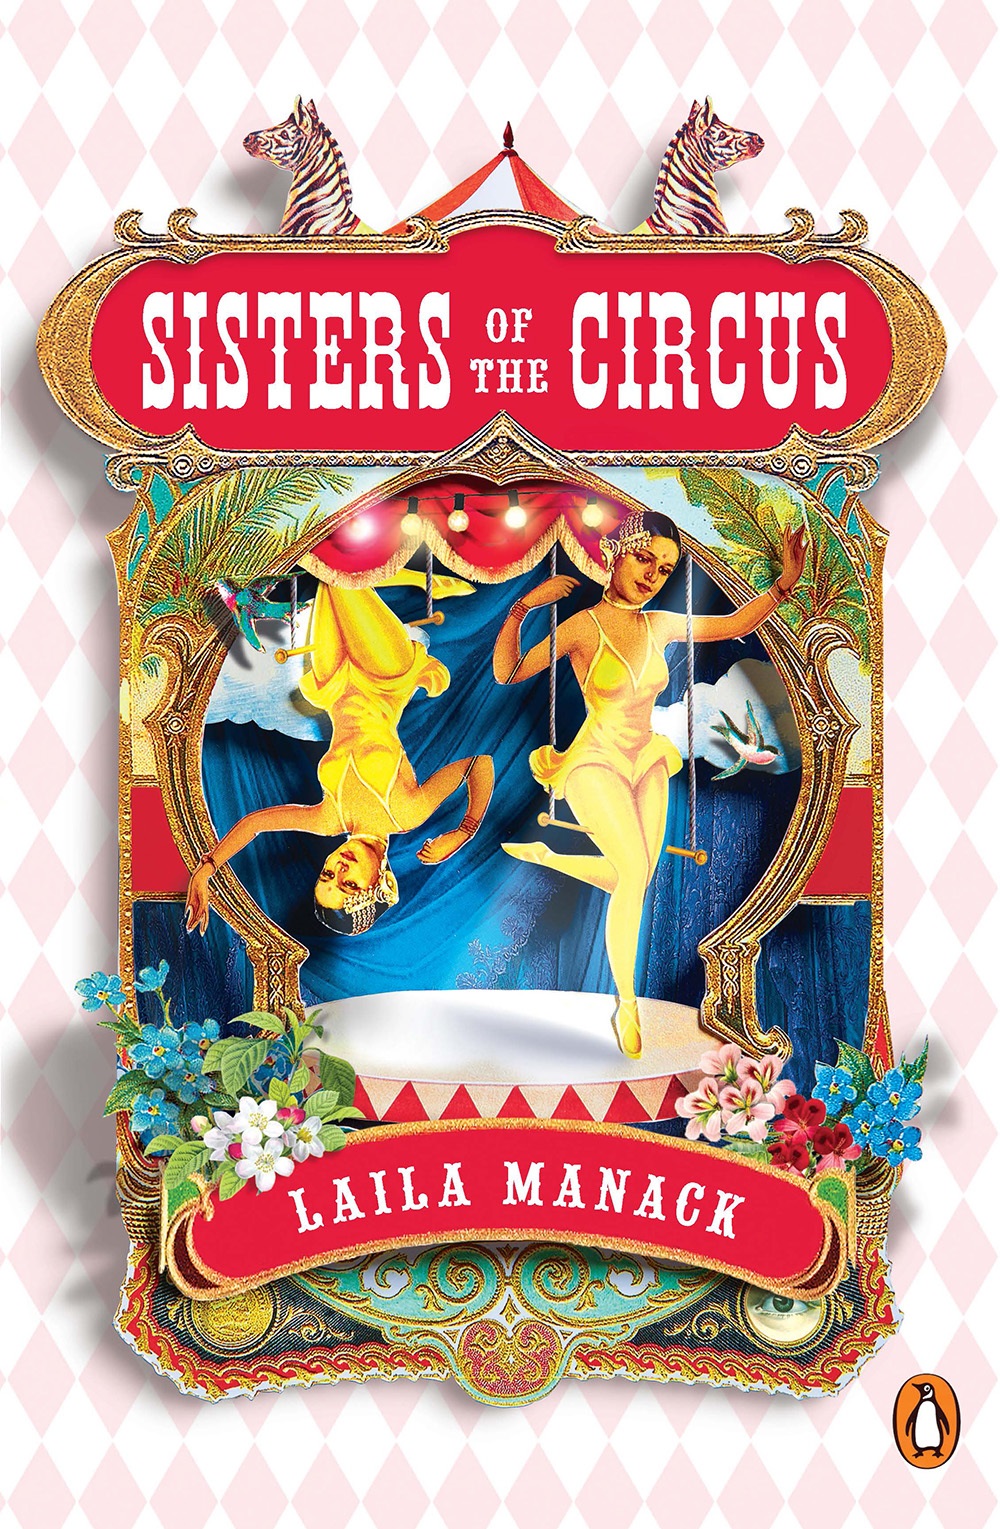 Sisters of the Circus by Laila Manack. (Penguin)